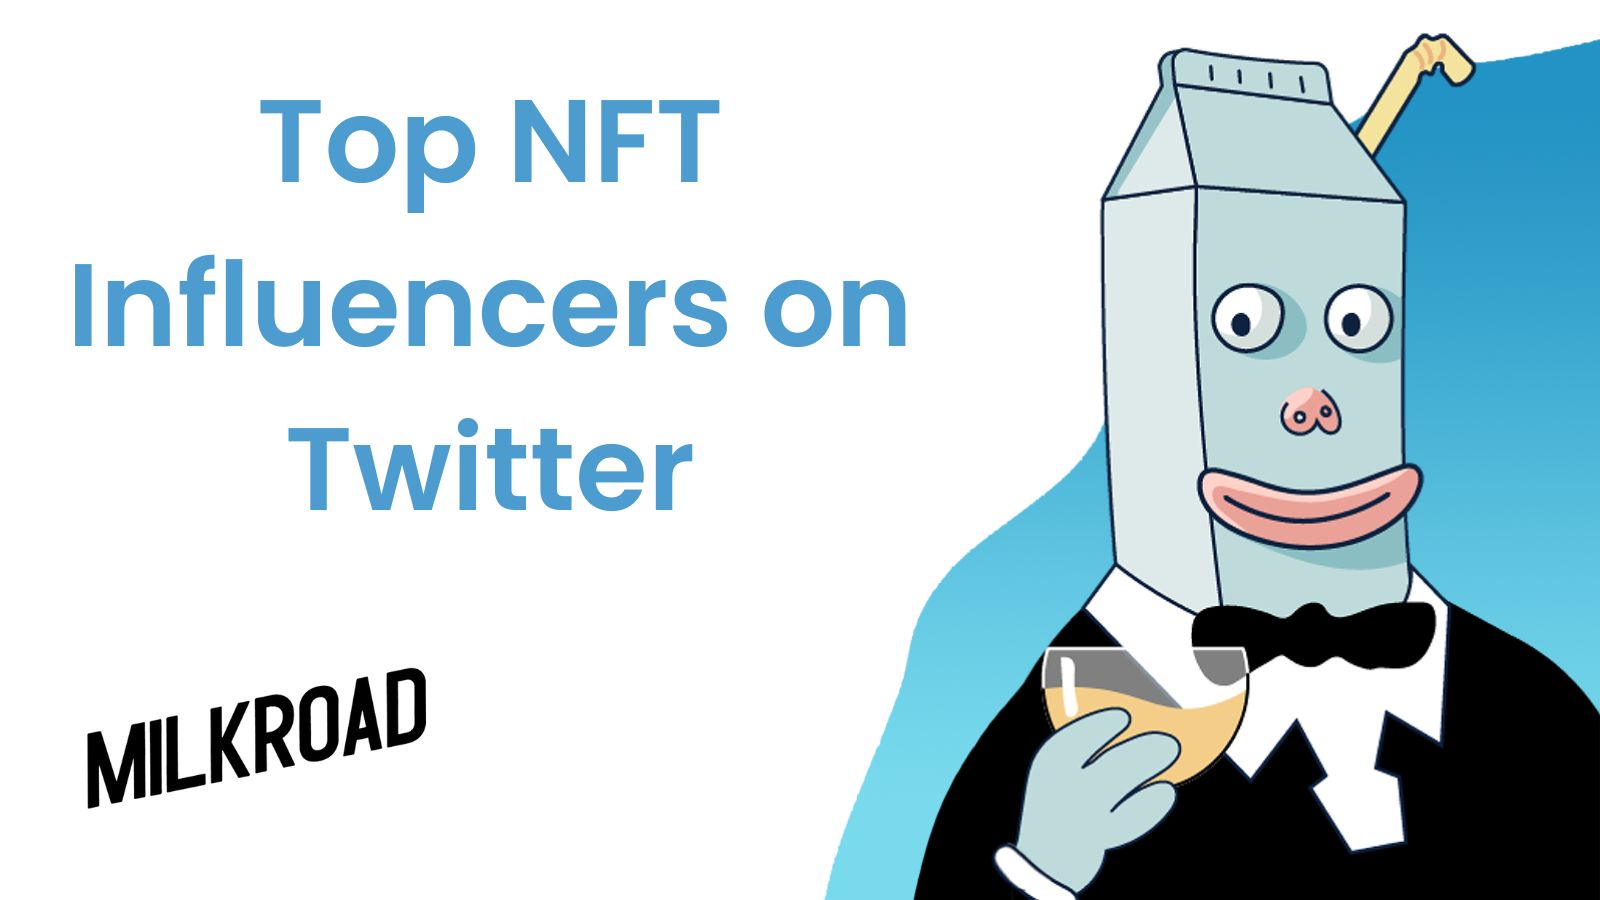 Top NFT Influencers on Twitter